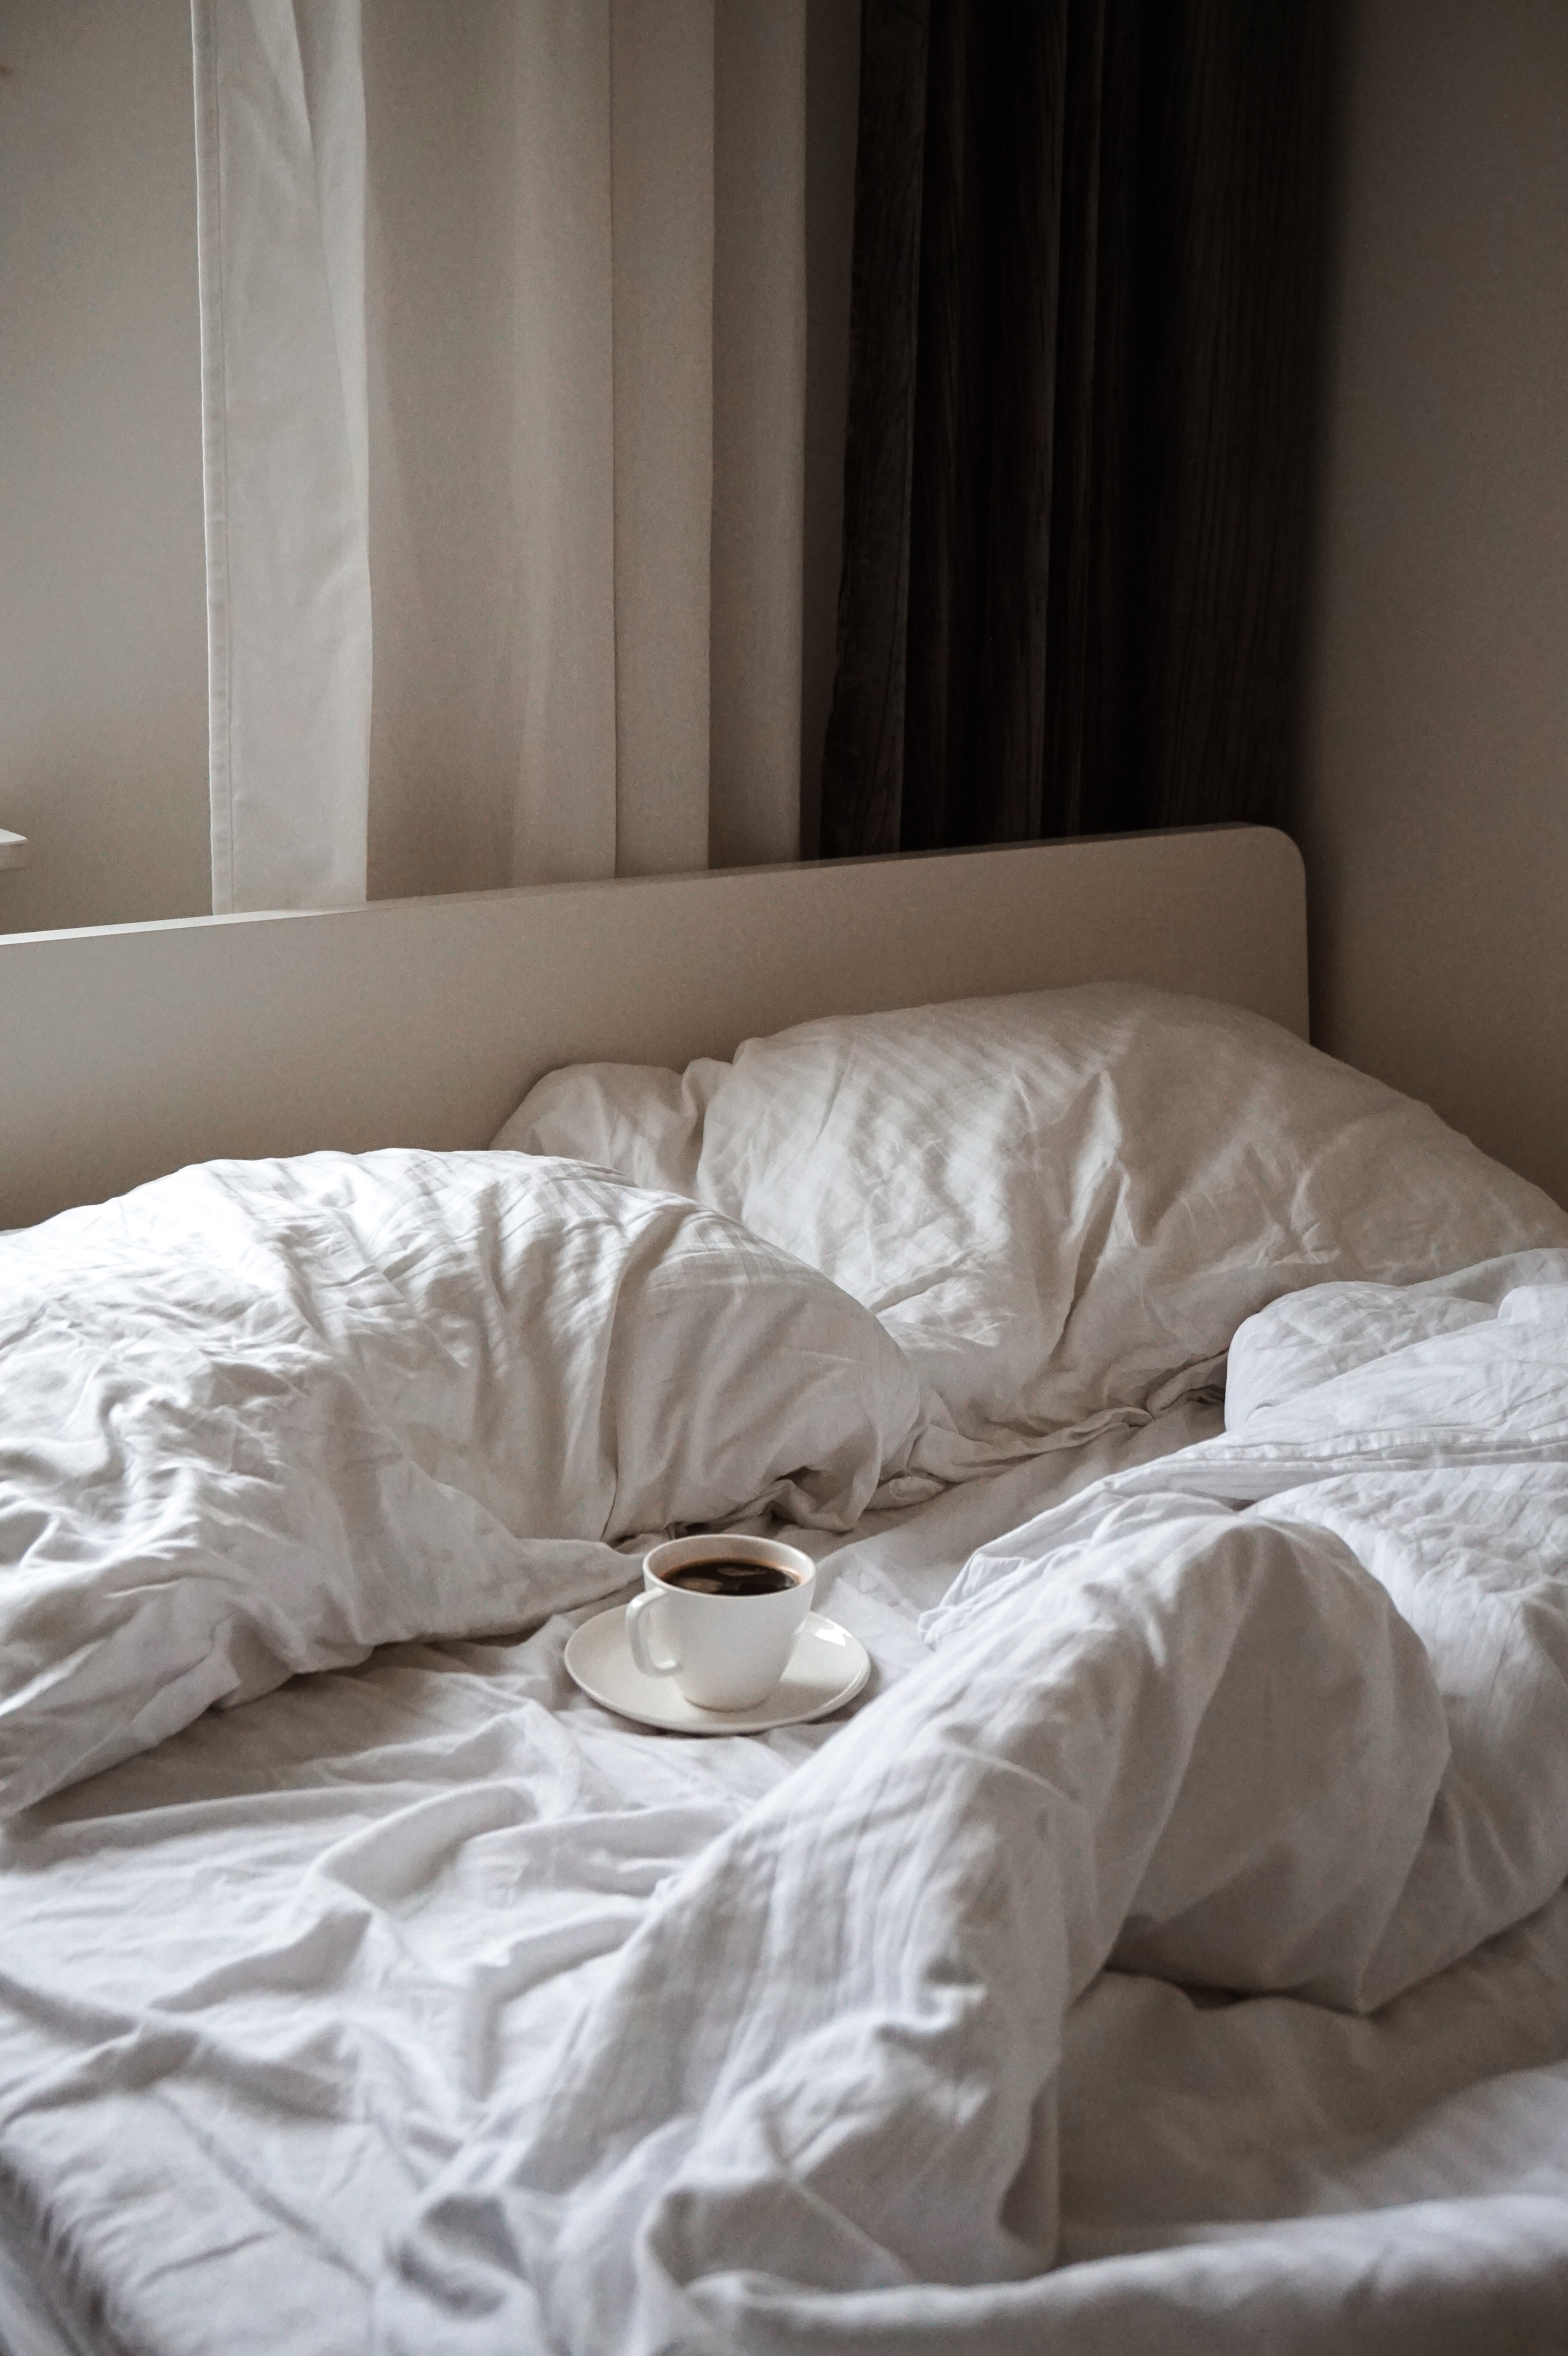 coffee, white, miscellanea, miscellaneous, cup, bed, cushions, pillows